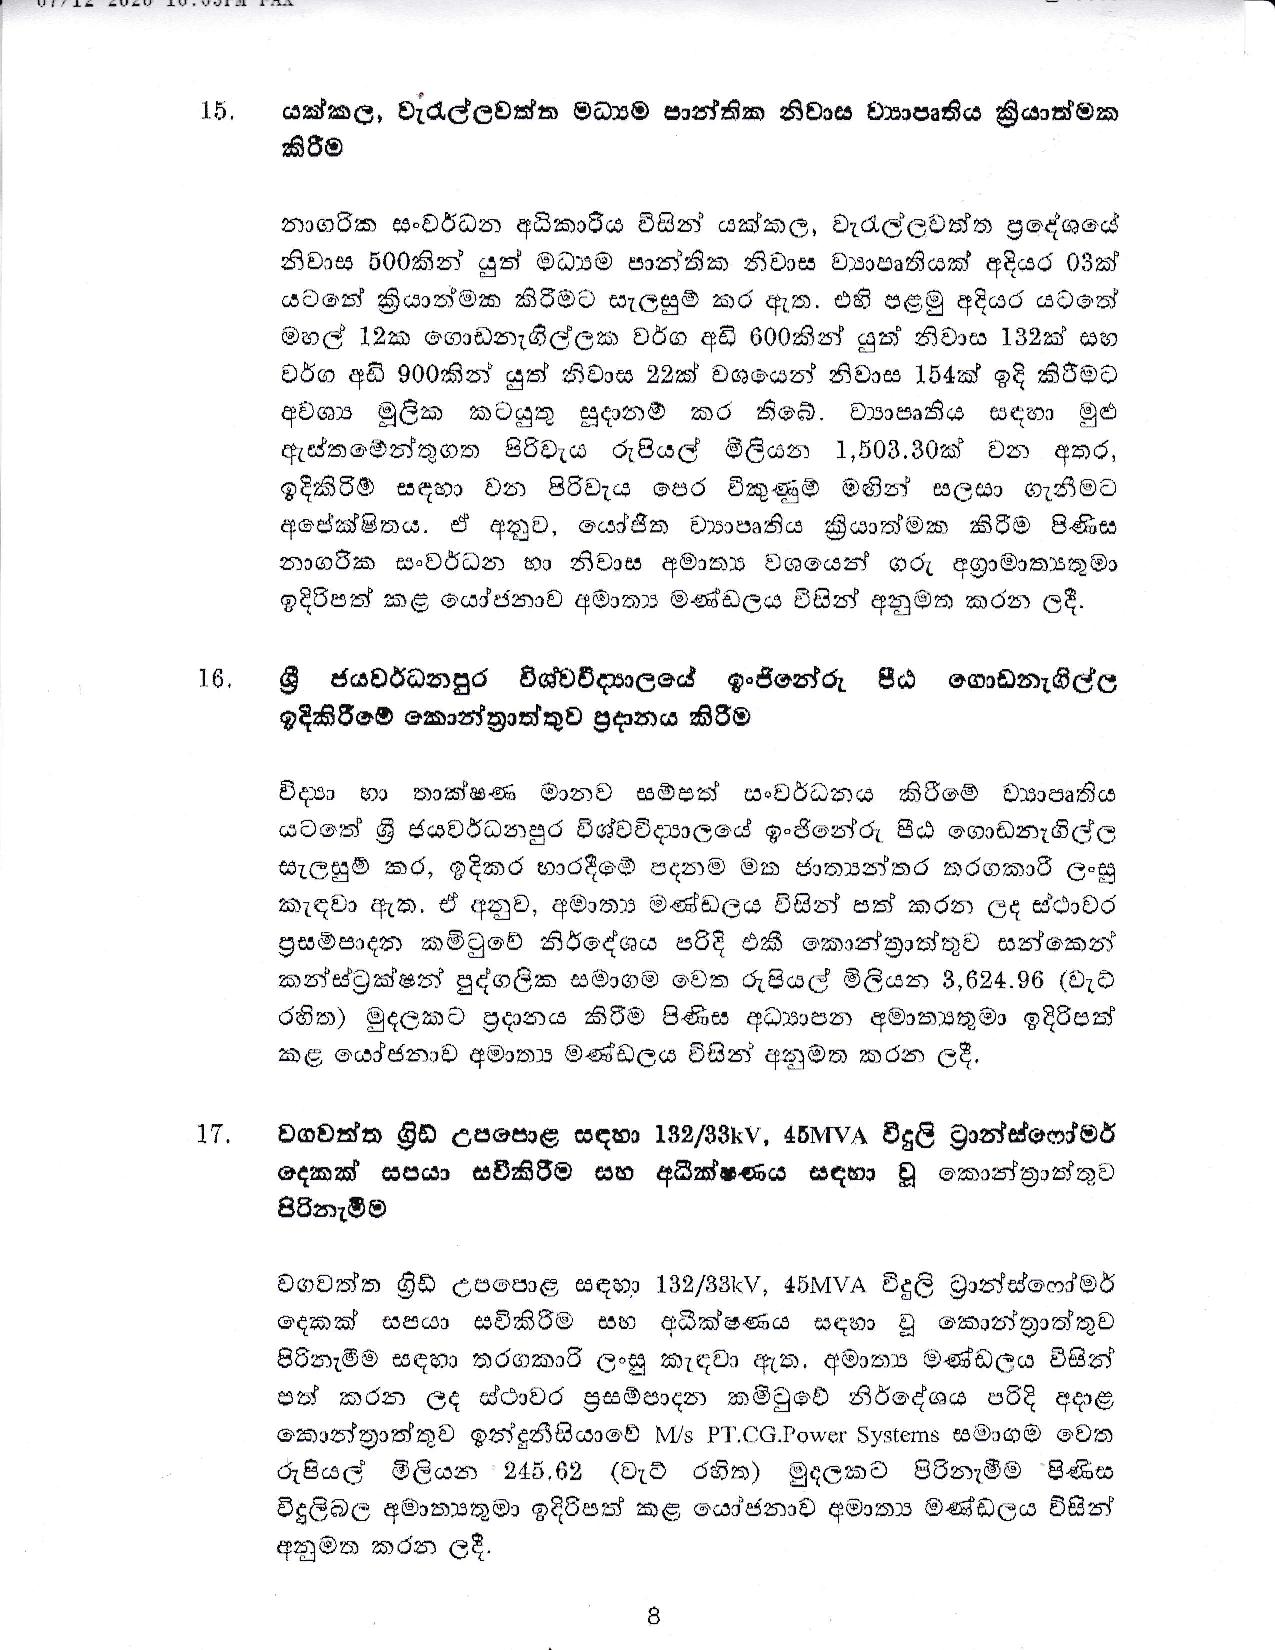 Cabinet Decision on 07.12.2020 page 008